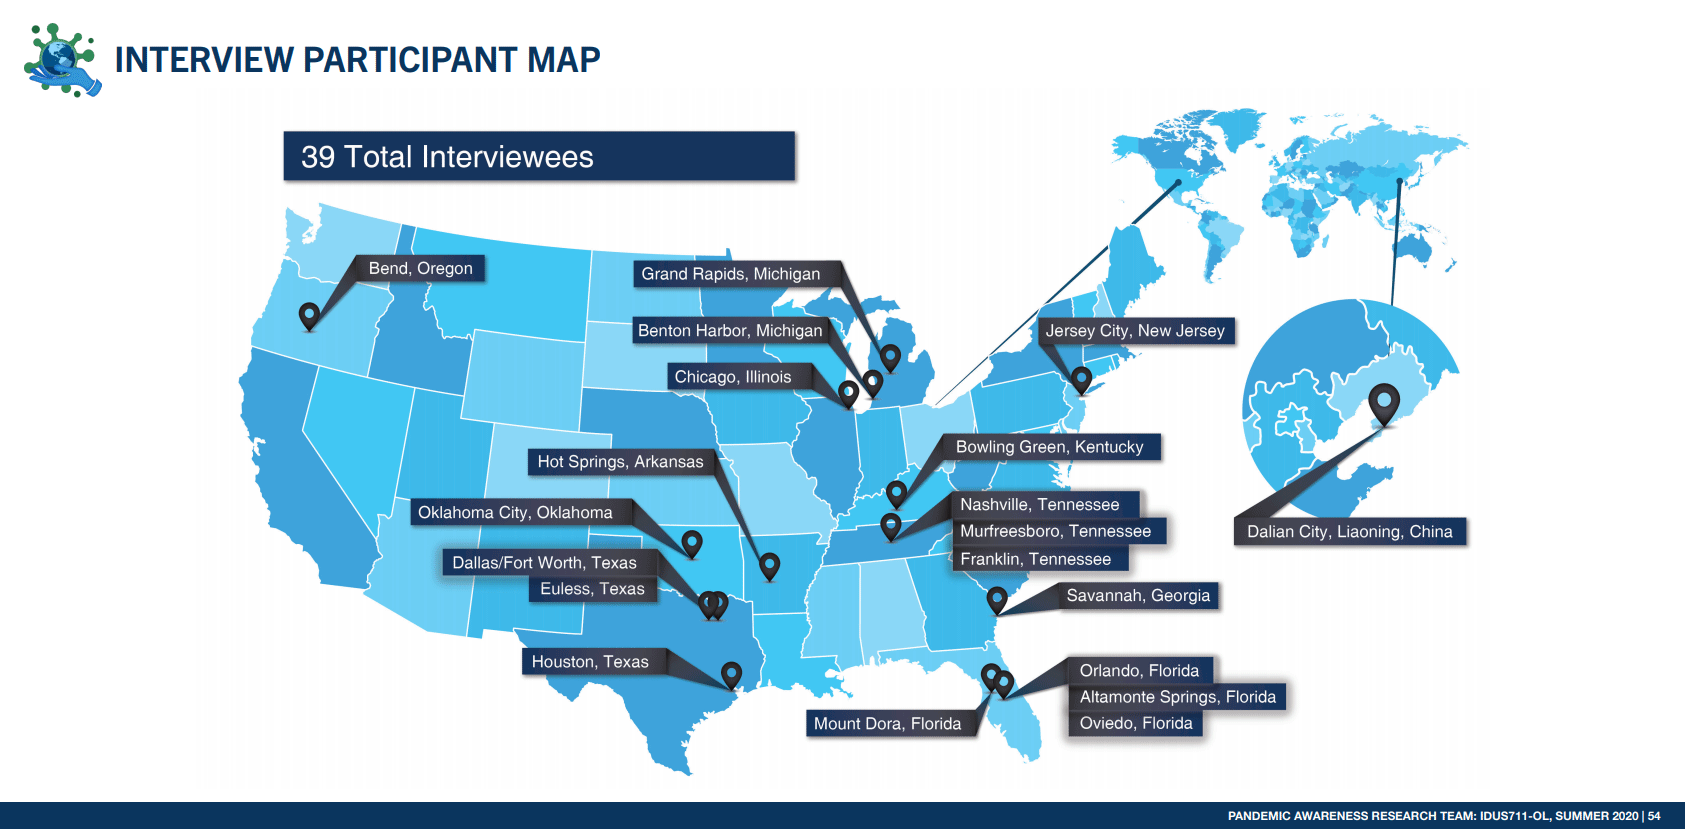 Map of interview participant locations